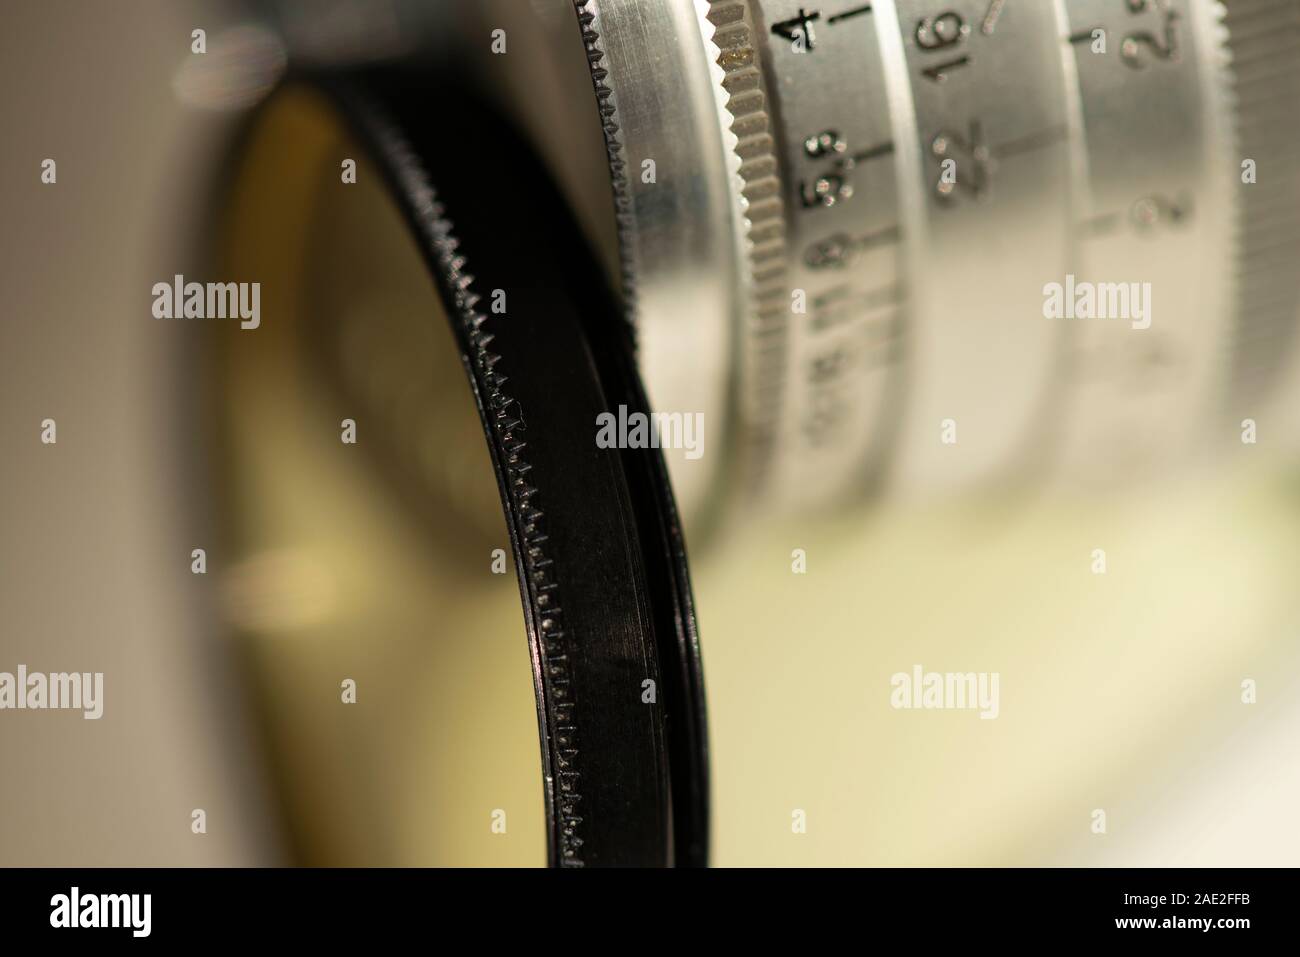 Extreme close up of vintage filter thread or filter ring and silver manual Russian camera lens. Stock Photo